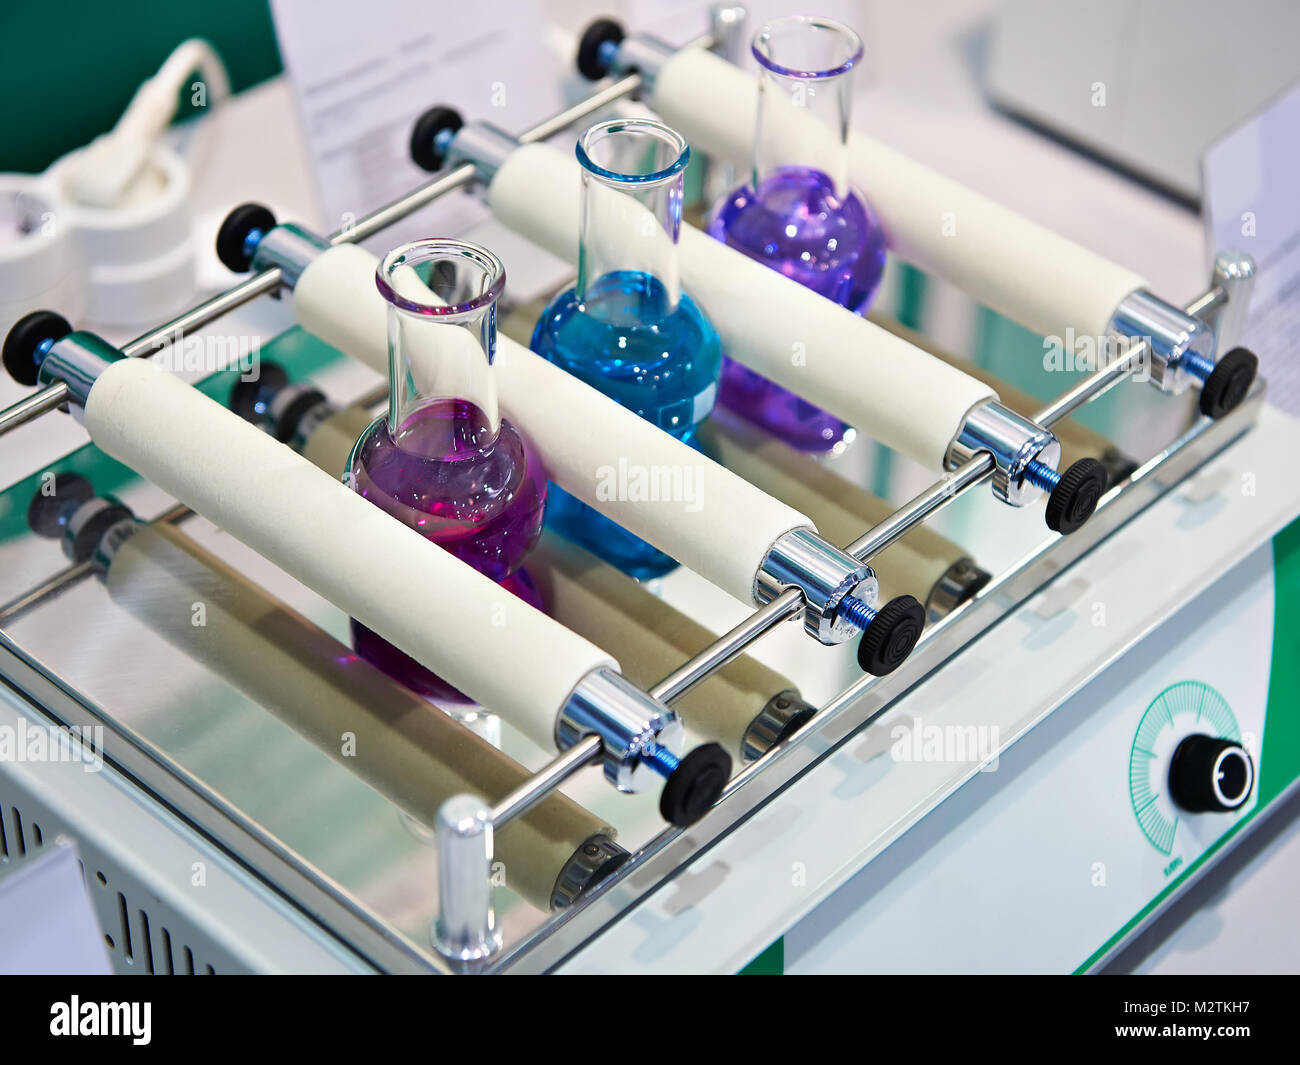 Linear shaker in chemical laboratory with samples Stock Photo - Alamy